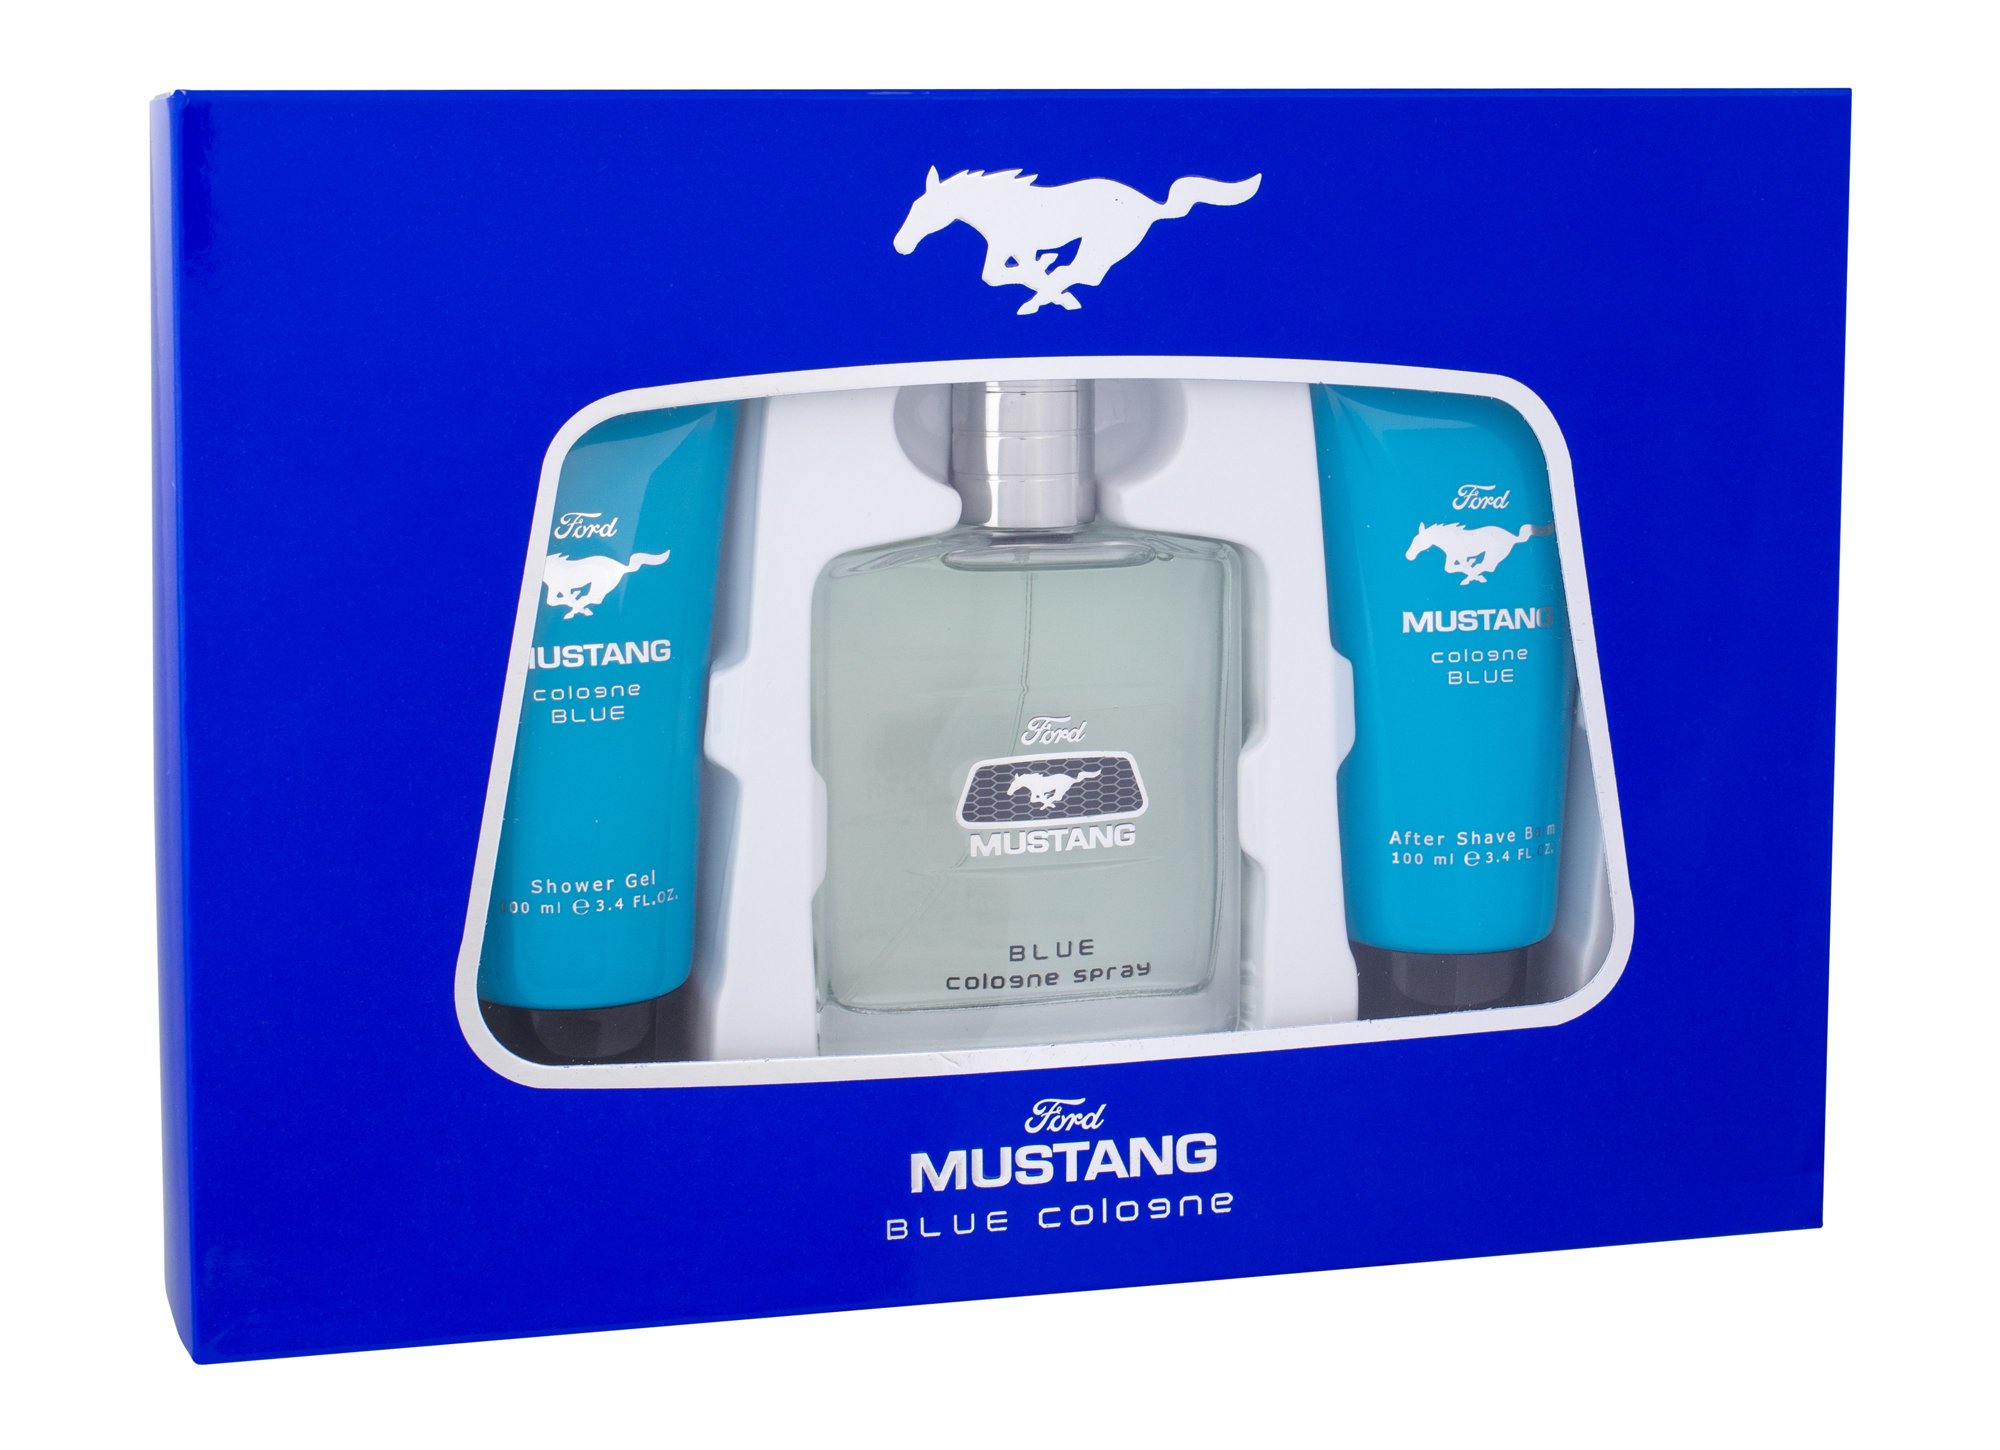 Ford Mustang Mustang Blue Cologne